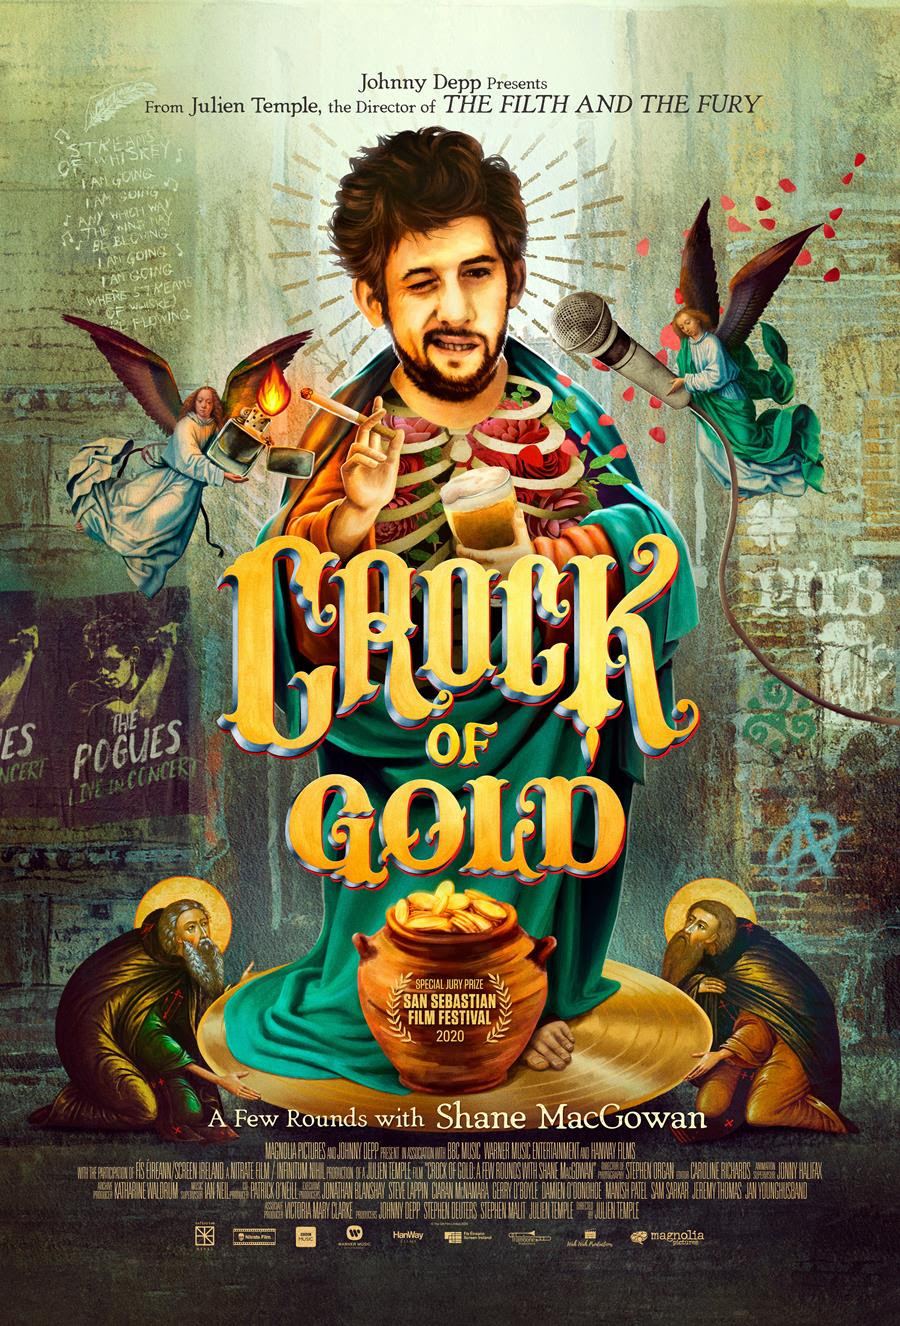 Watch the official trailer for CROCK OF GOLD: A FEW ROUNDS WITH SHANE MACGOWAN